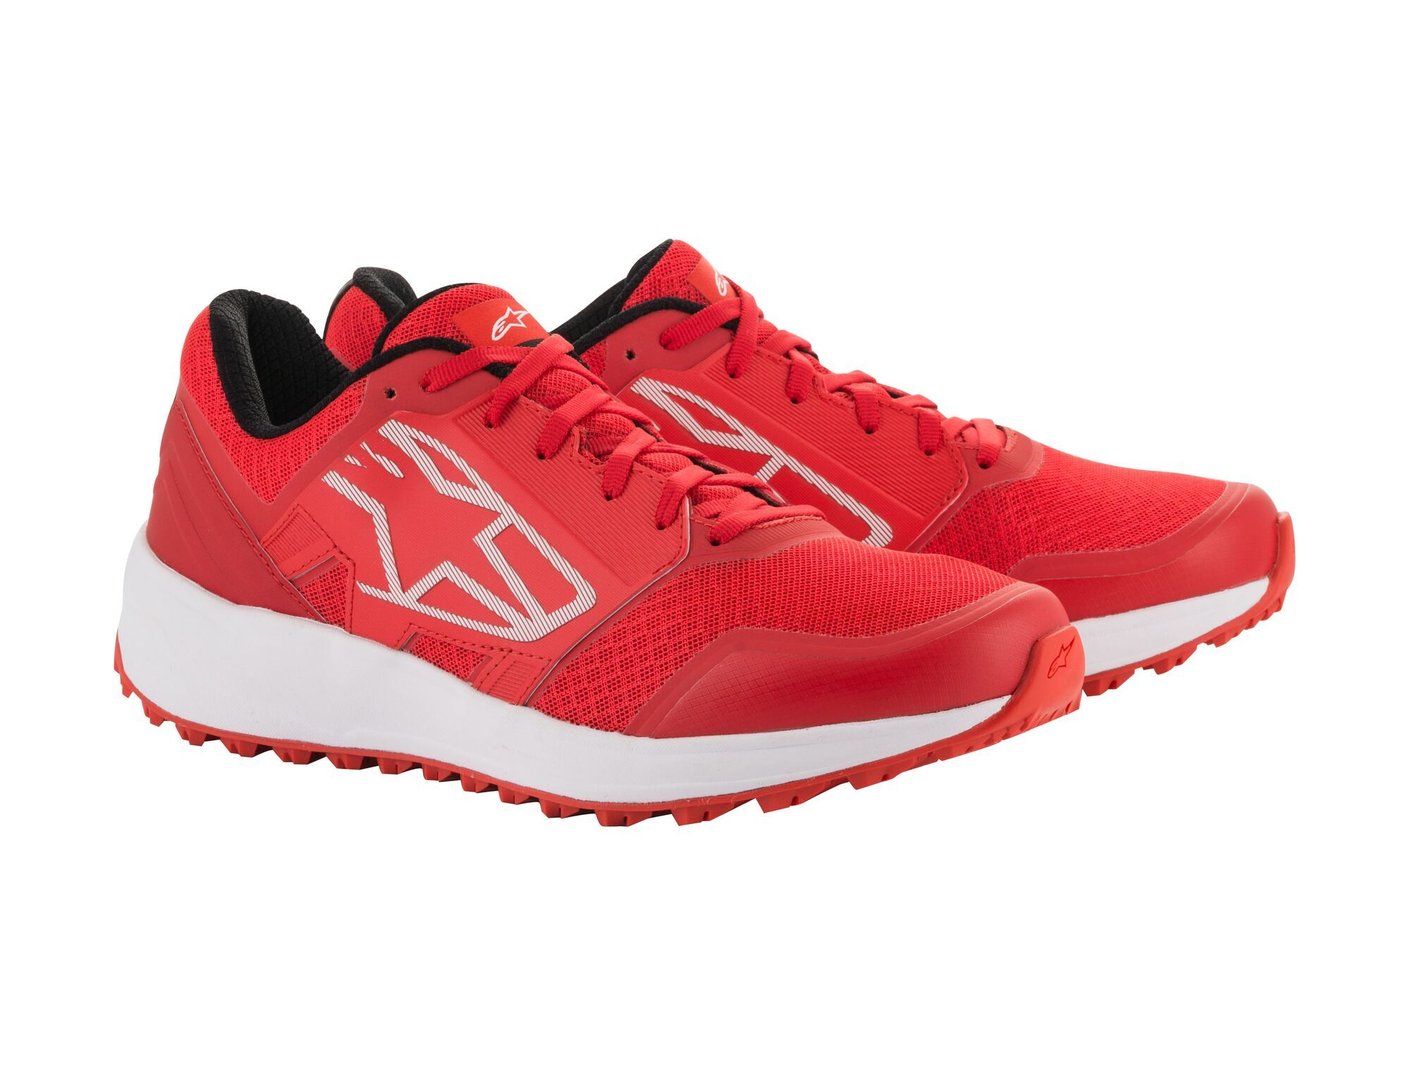 ALPINESTARS 2654820_32_8,5 META TRAIL RUNNING shoes, red/white, size 41 (8,5) (Фото-1)